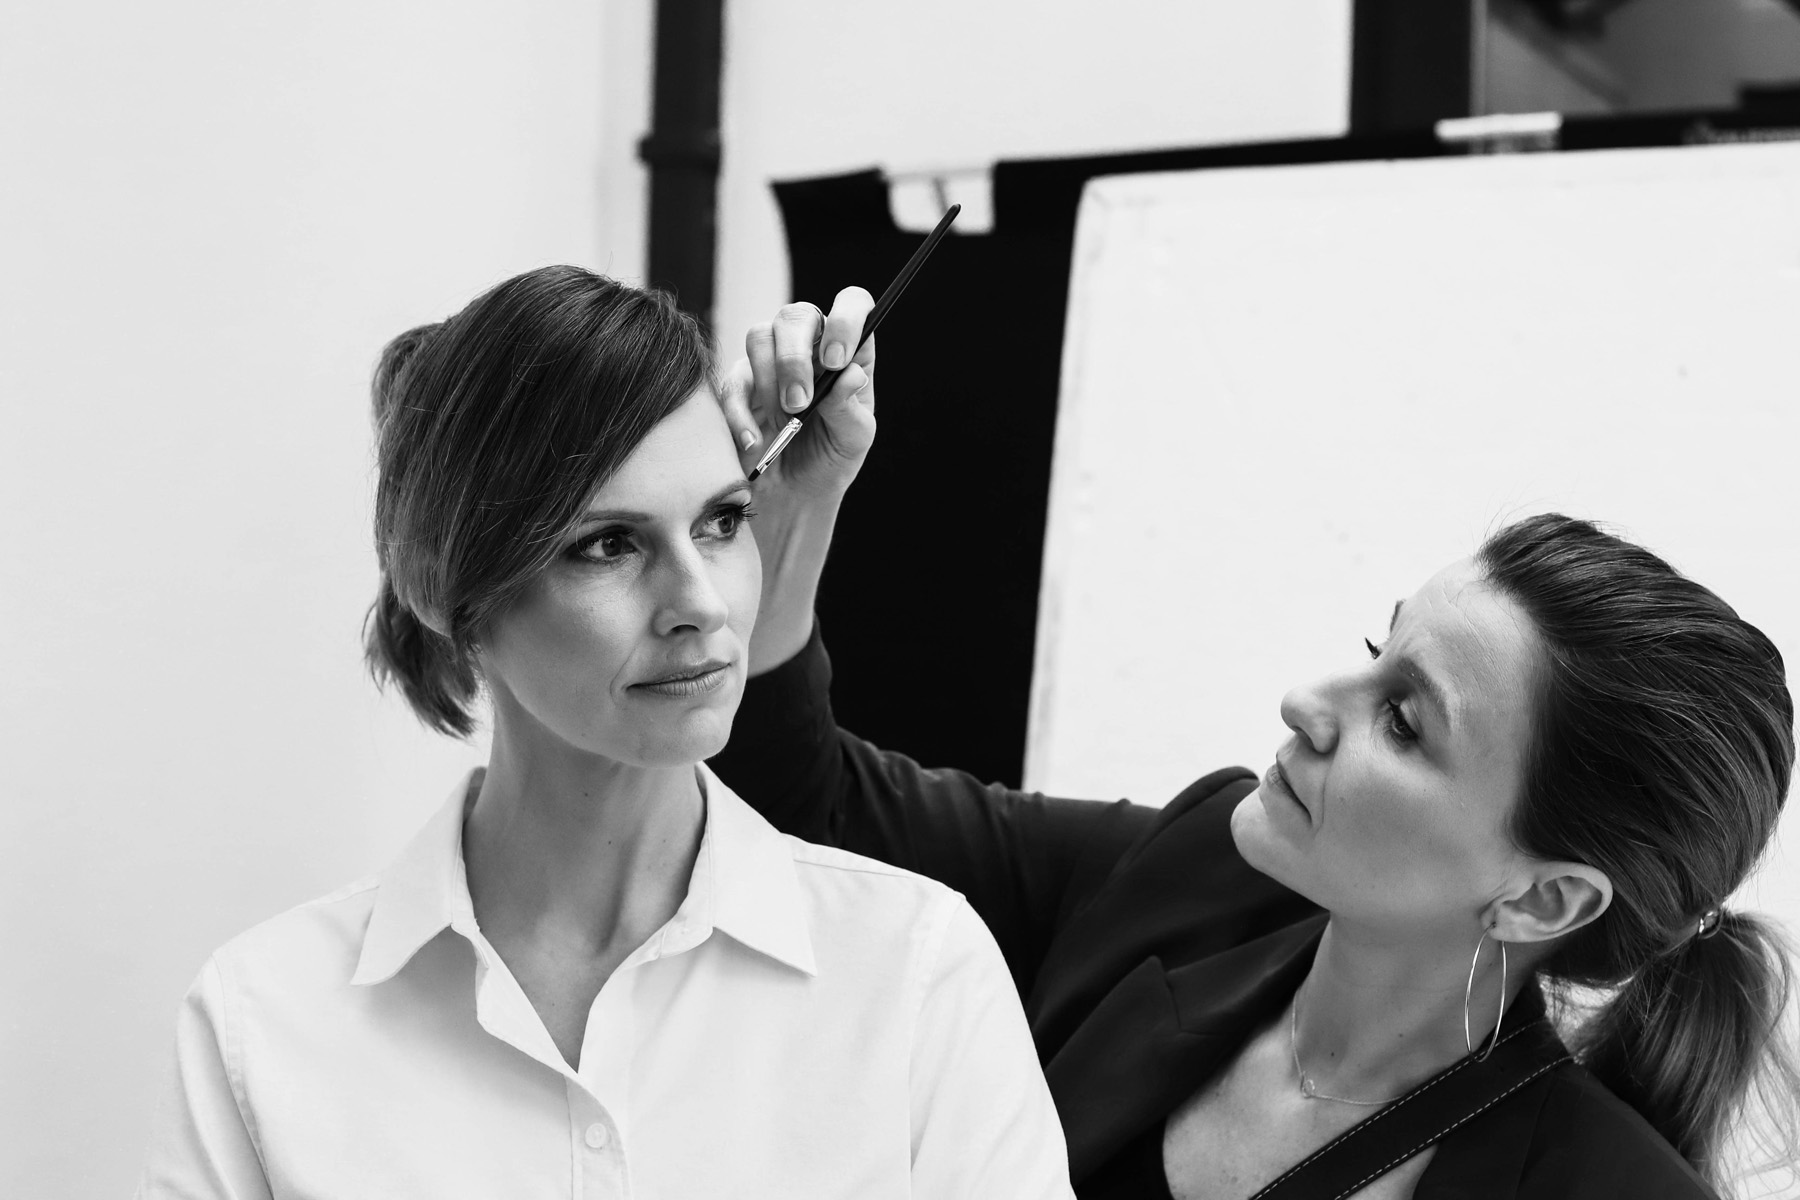 Make-up artist applying make-up to a woman in a white blouse before a photo shoot